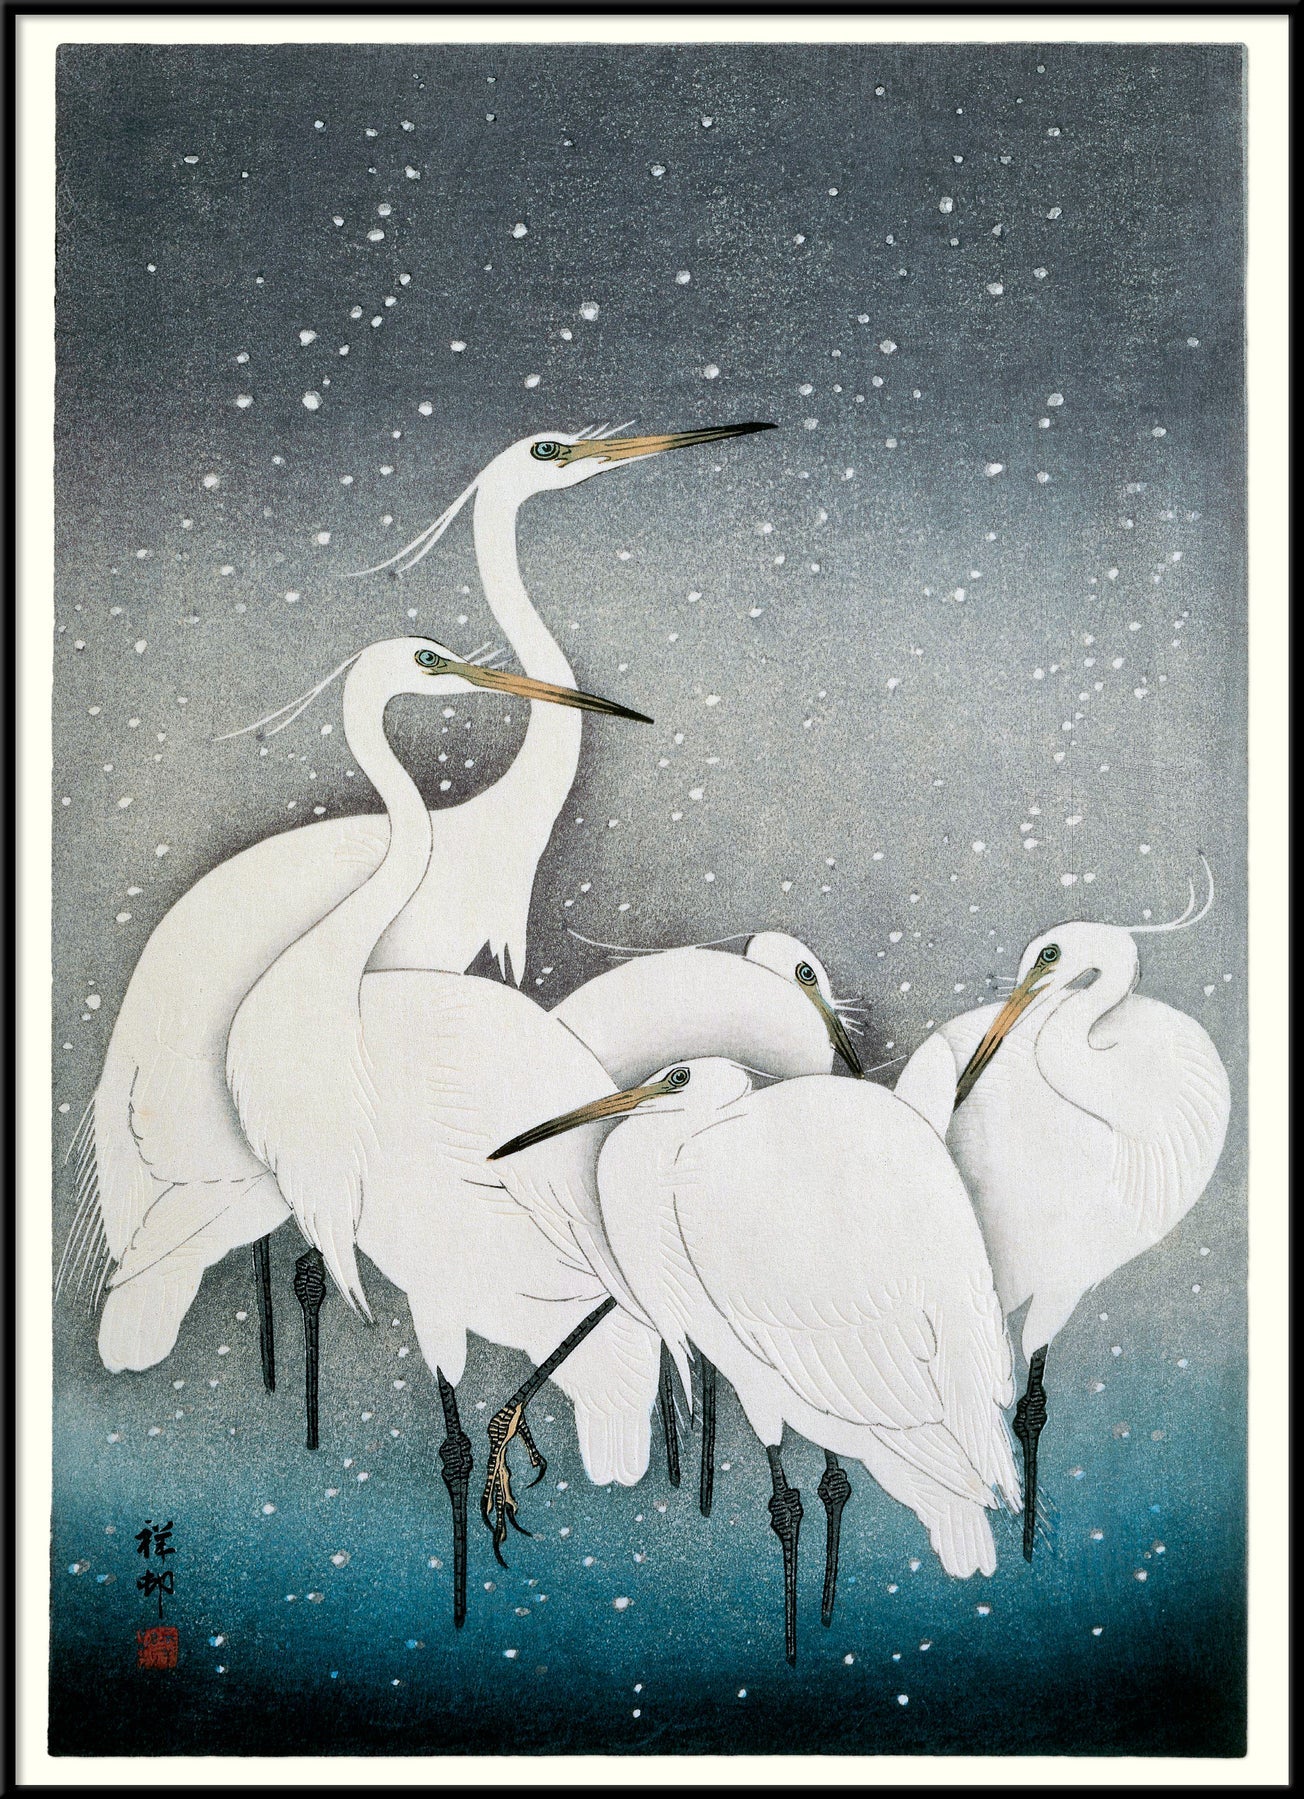 Affiche Snowy Herons